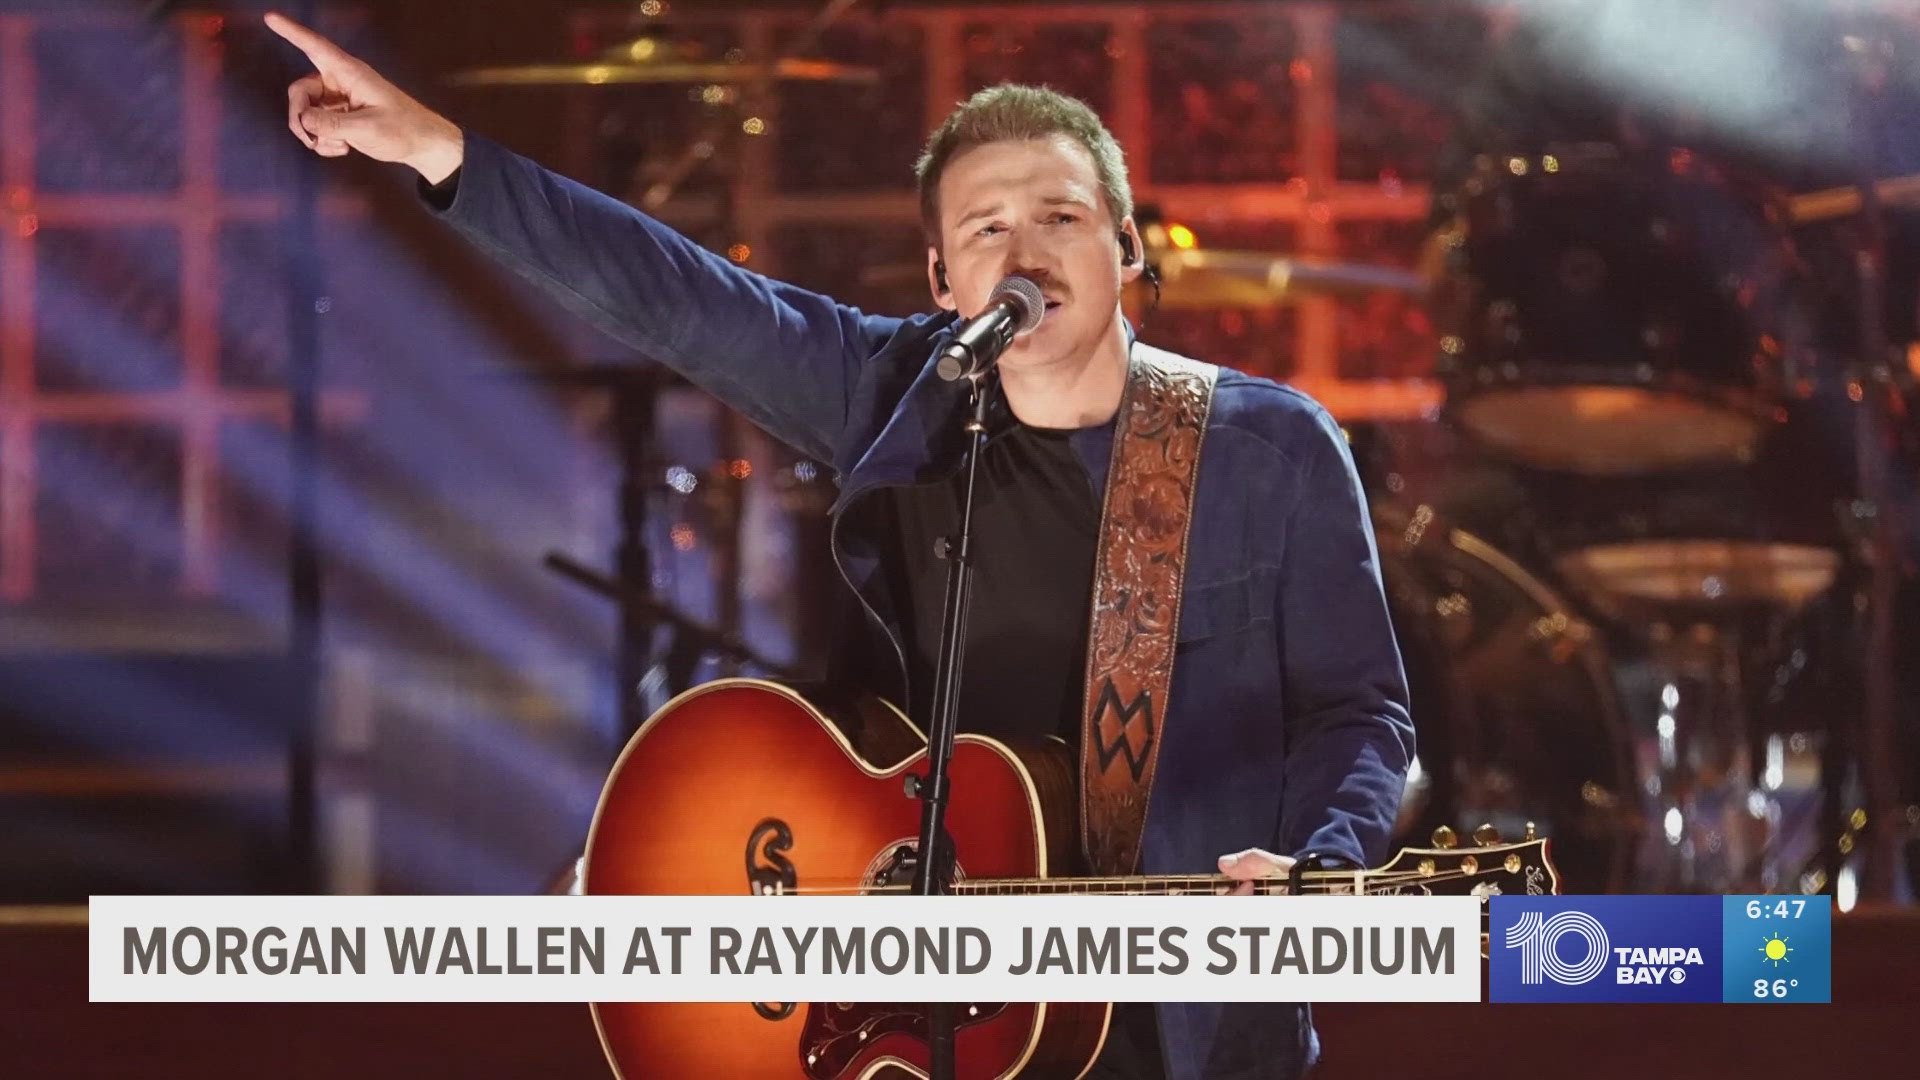 Wallen will perform on July 11 and 12 at Raymond James Stadium. Several roads will be closed and congestion is expected in the surrounding areas.